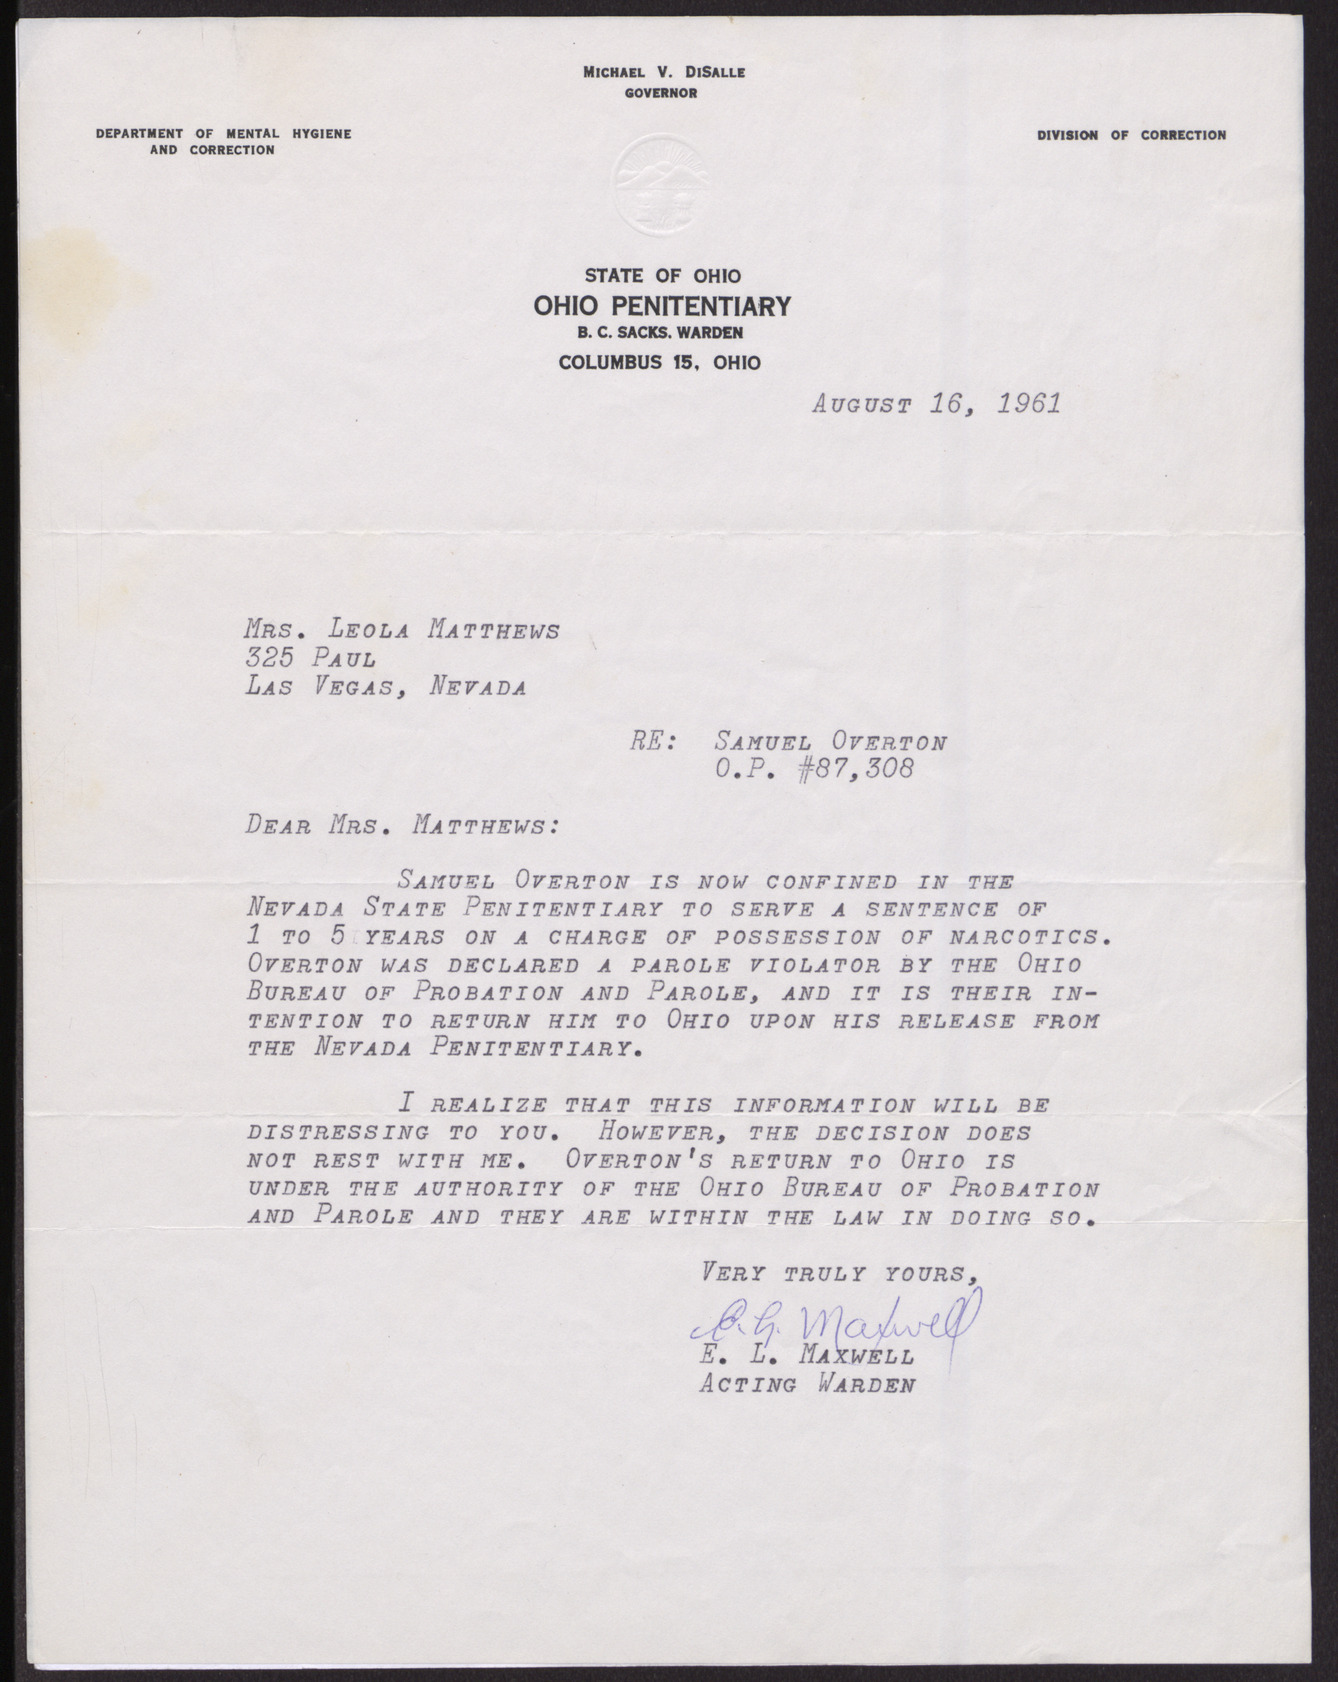 Letter to Mrs. Leola Matthews from E. L. Maxwell, August 16, 1961